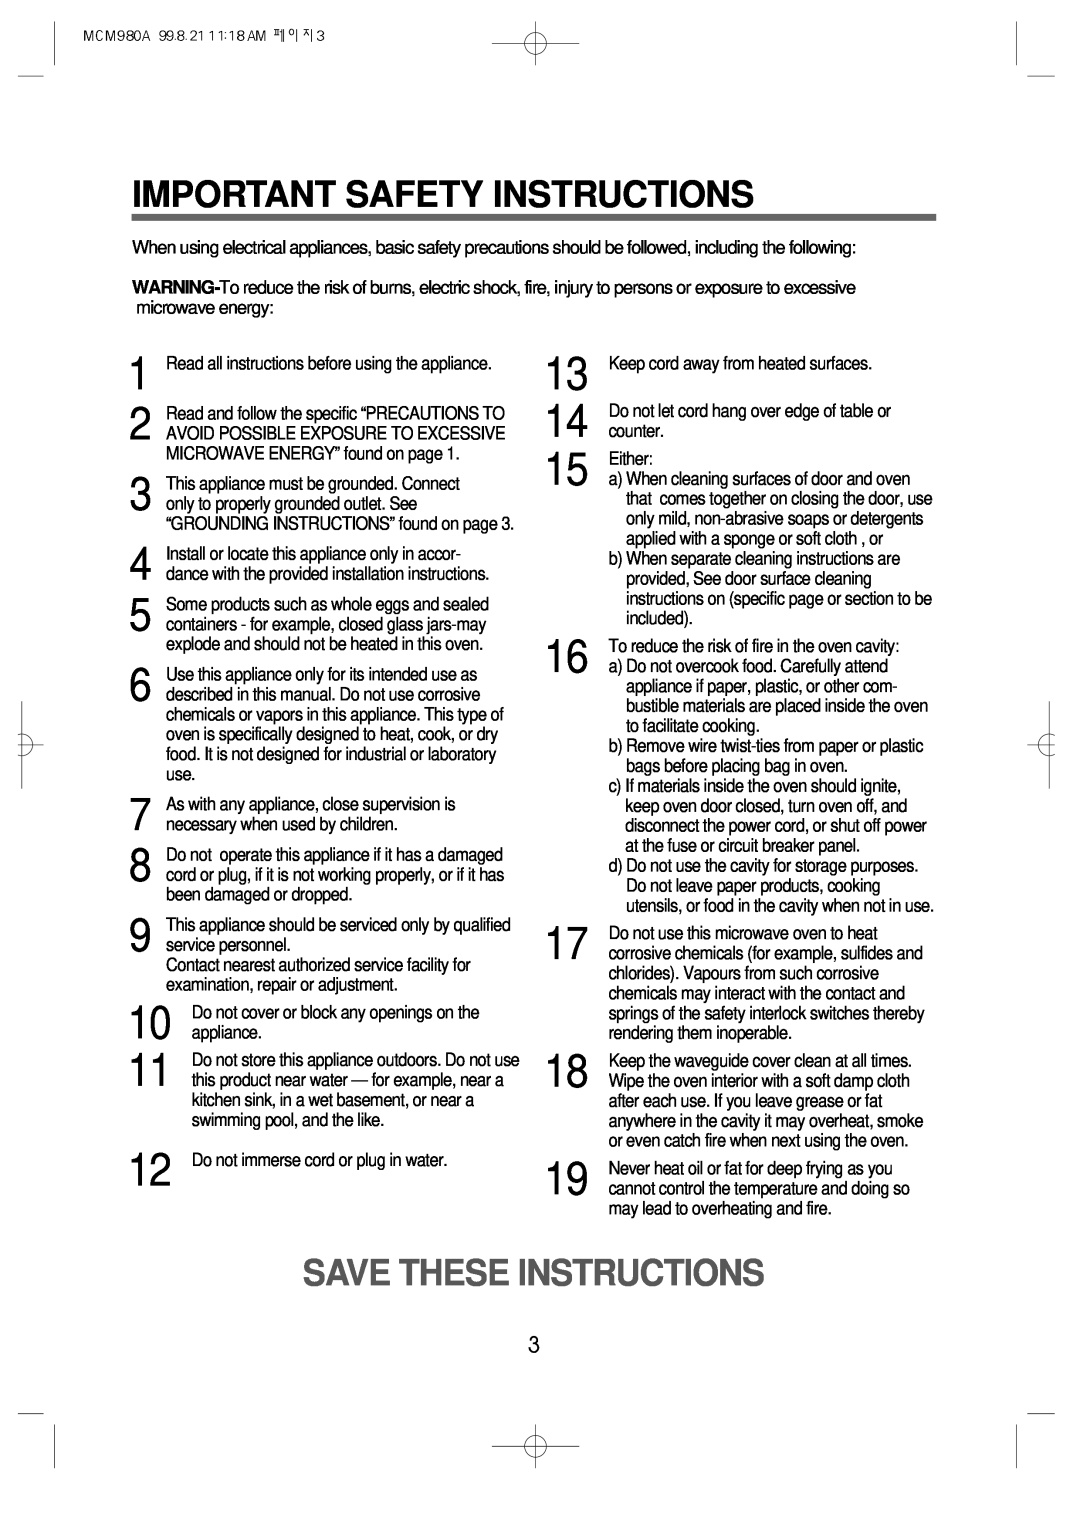 Daewoo MCM980A manual Important Safety Instructions, Save These Instructions 